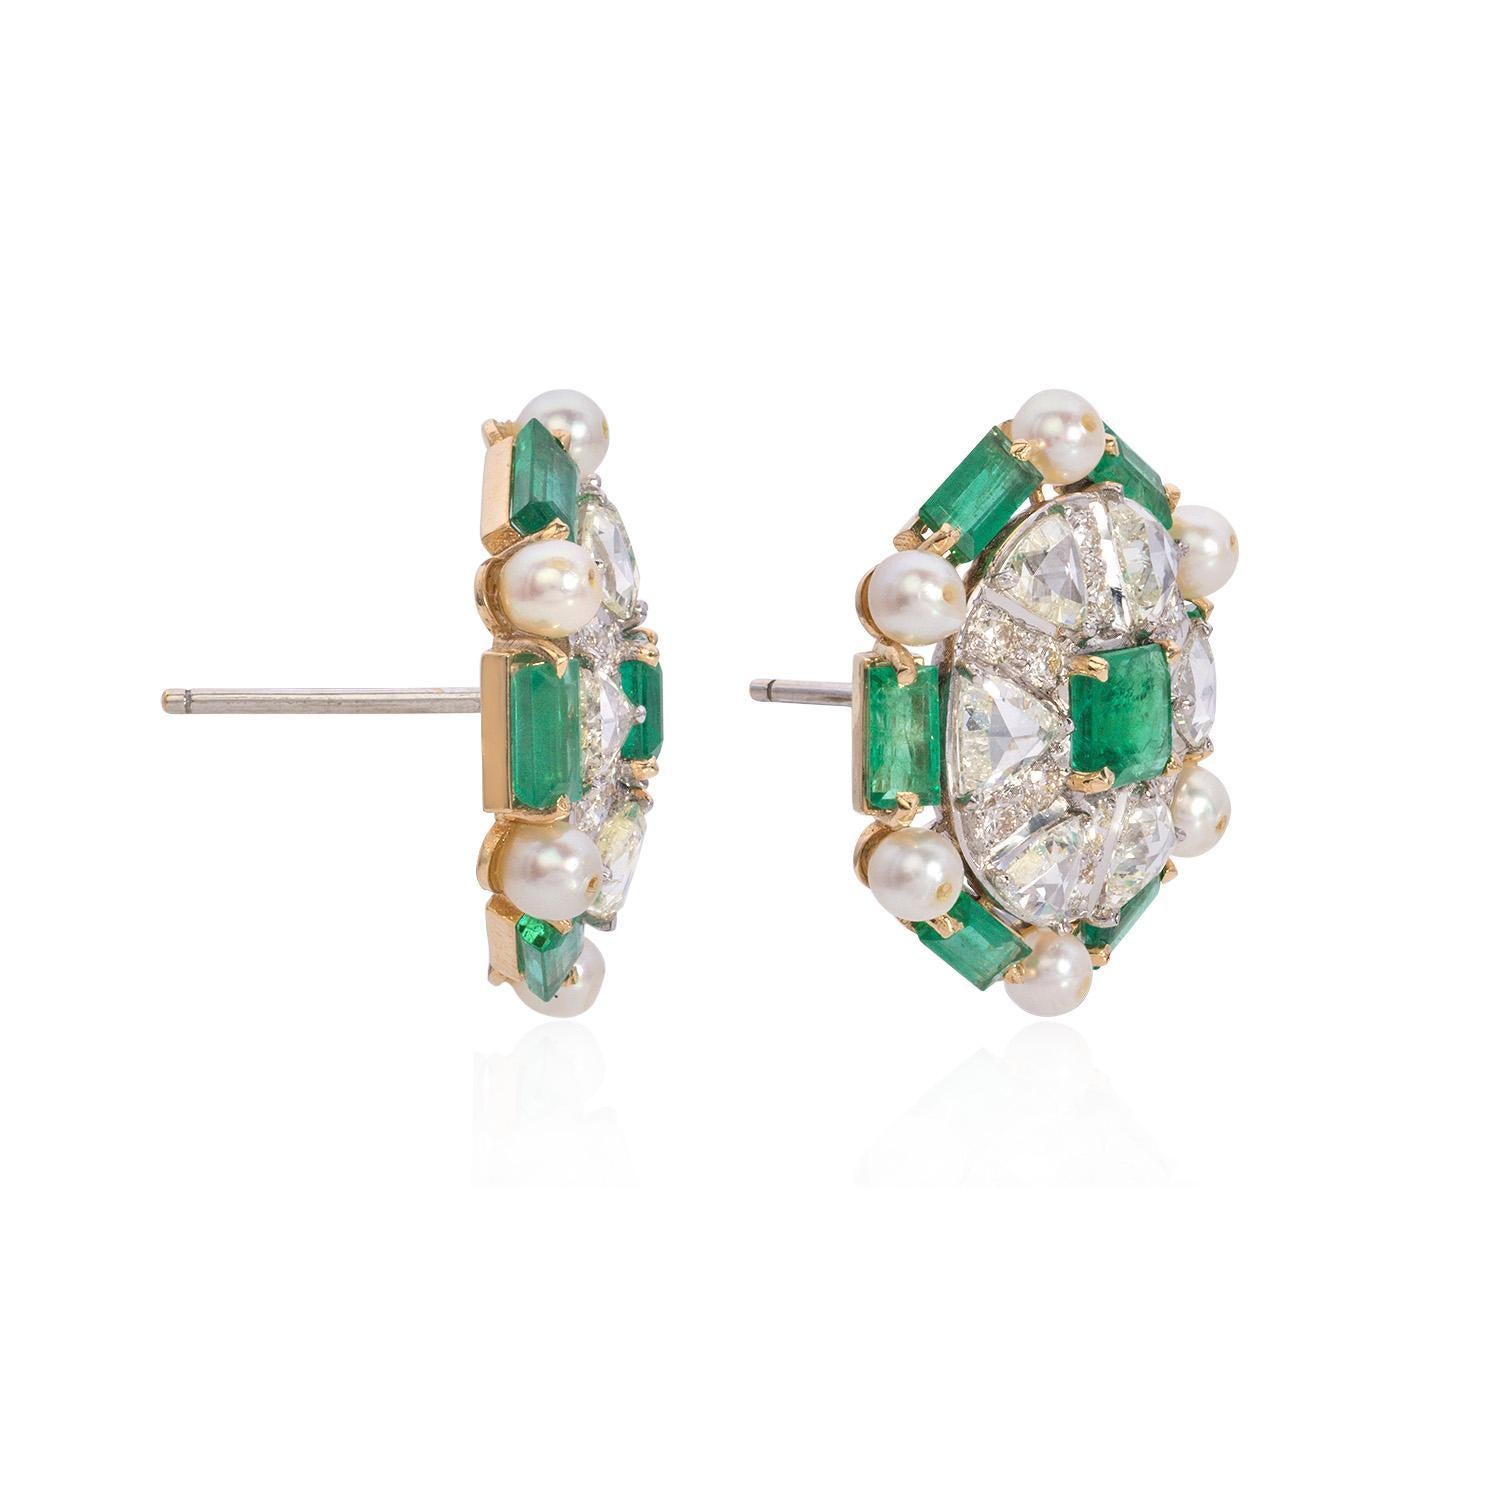 Indulge in the timeless allure of our Pearl and Emerald Earrings, a stunning blend of sophistication and natural beauty. Each earring features a luminous Round-cut pearl with a total carat weight of 1.02, exuding a classic elegance that never goes